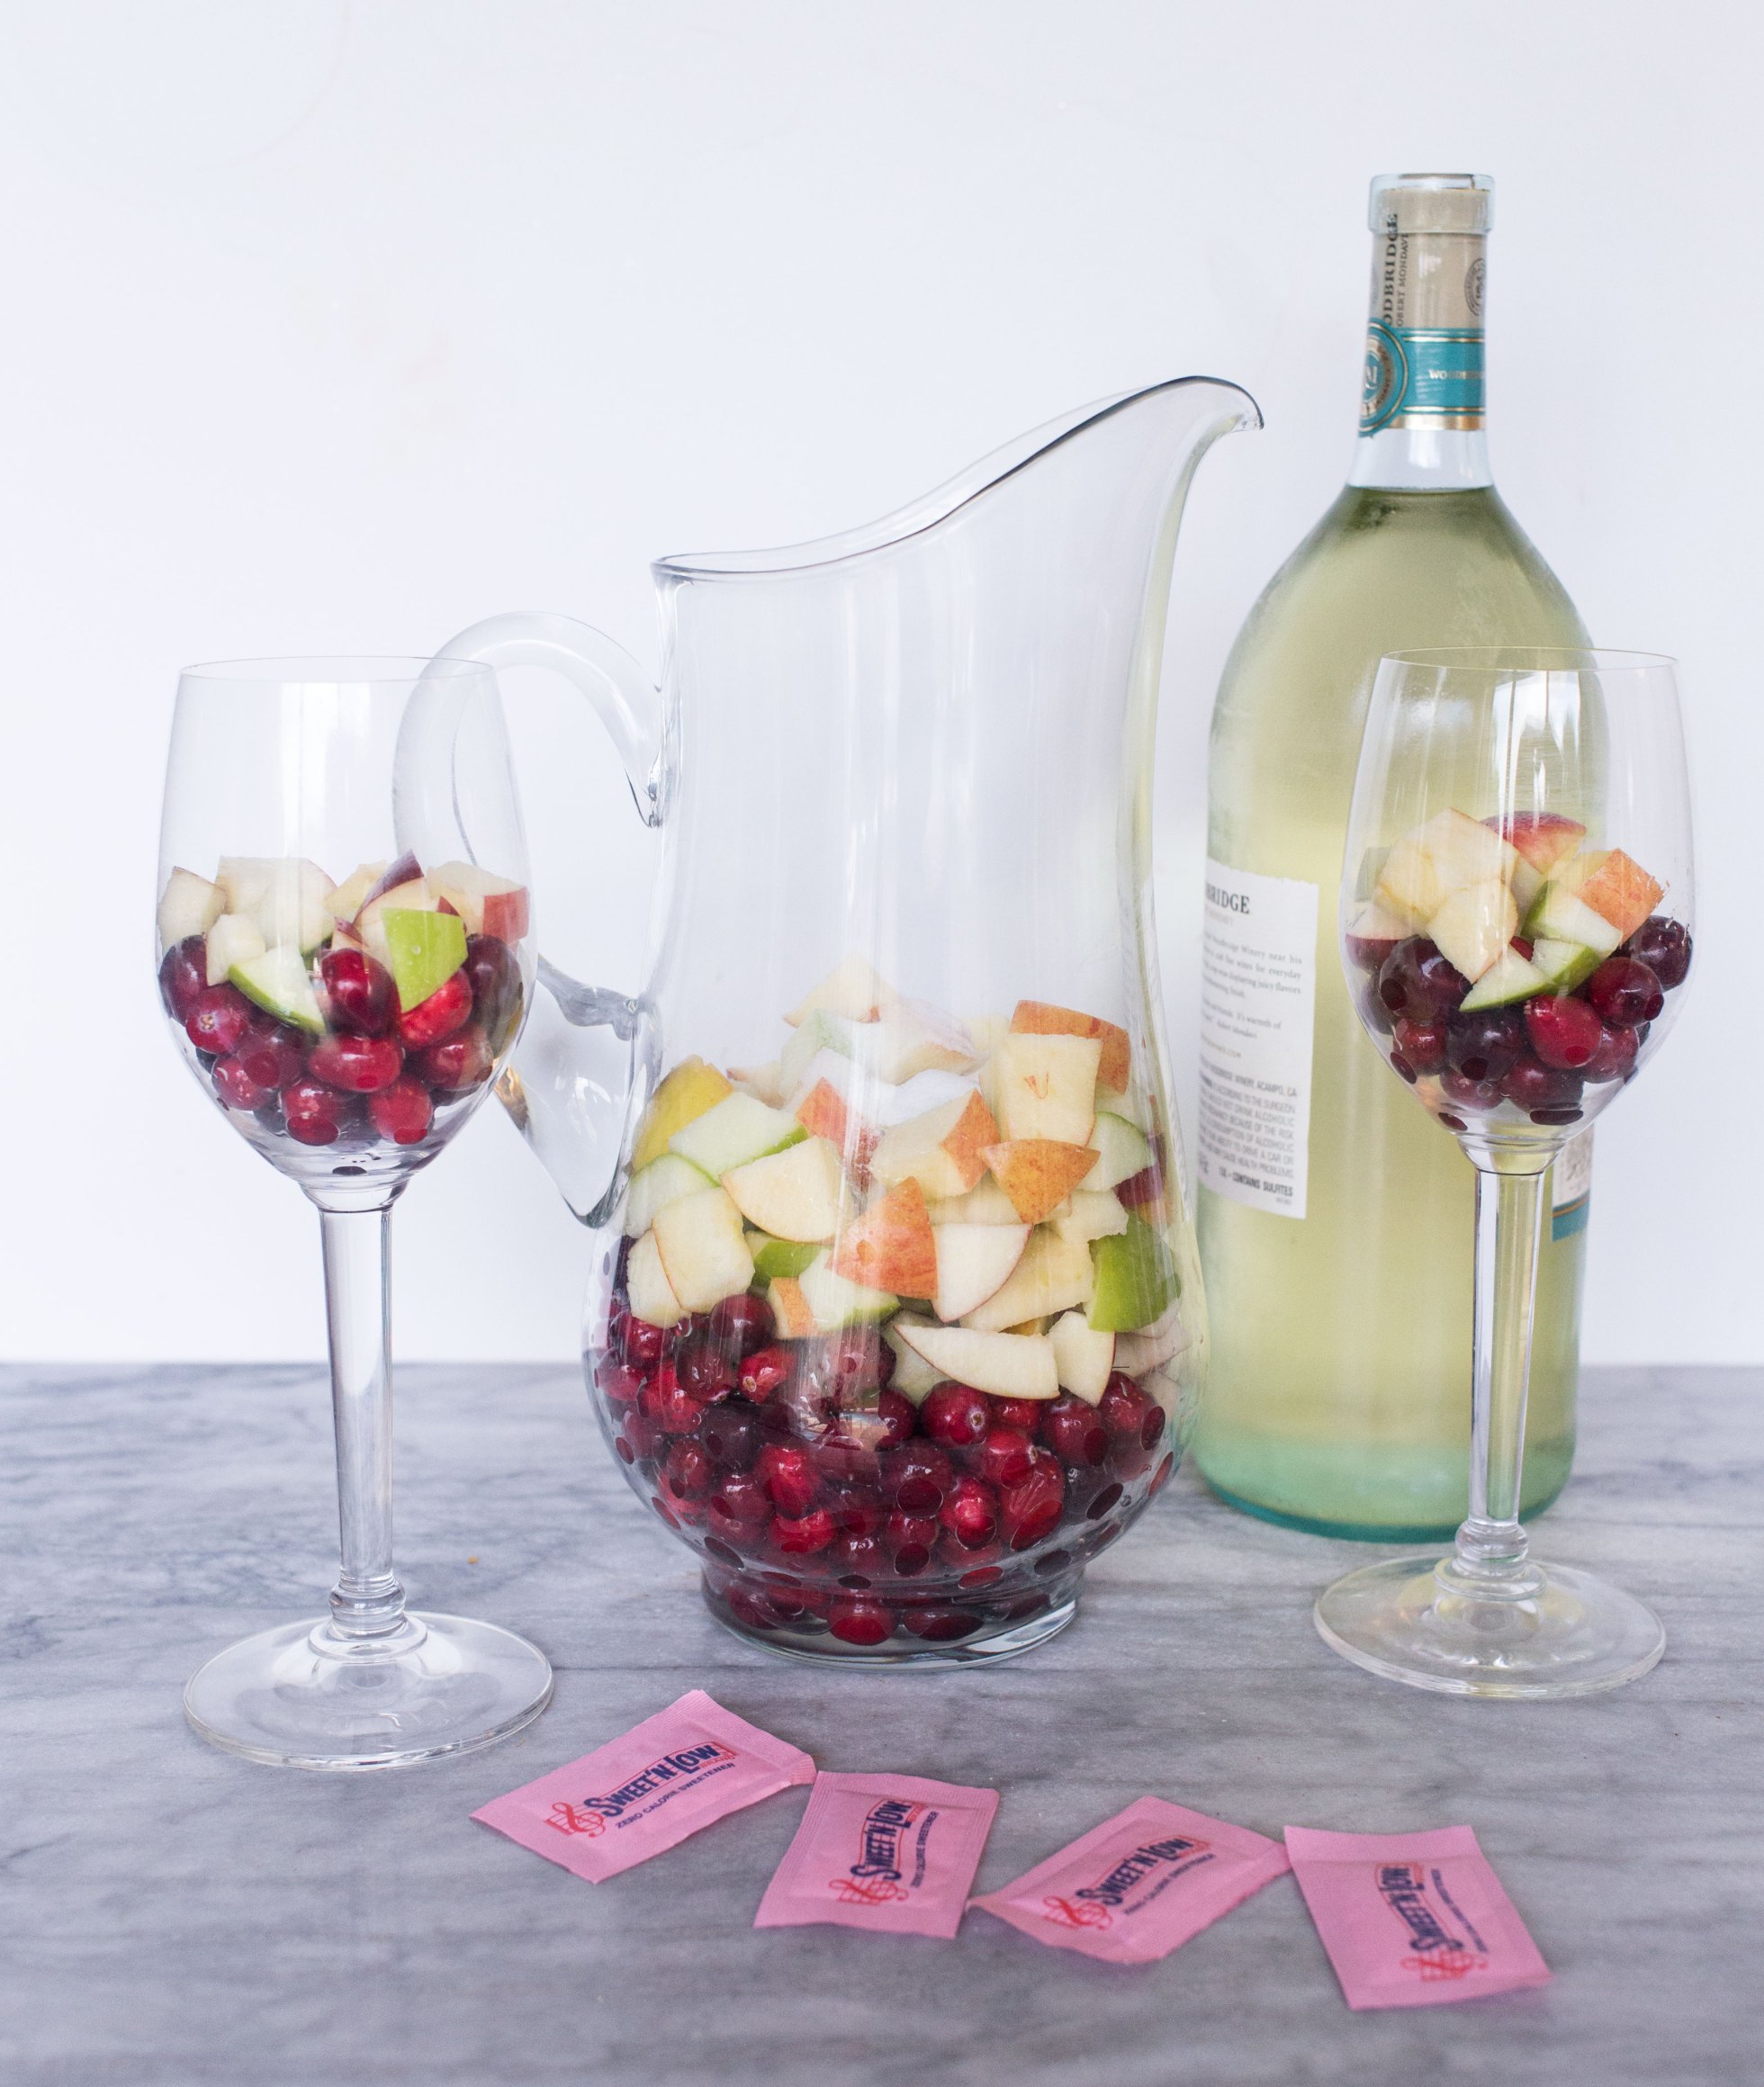 Cranberry Apple Sangria Ultimate List of Holiday Cocktail & Mocktail Recipes